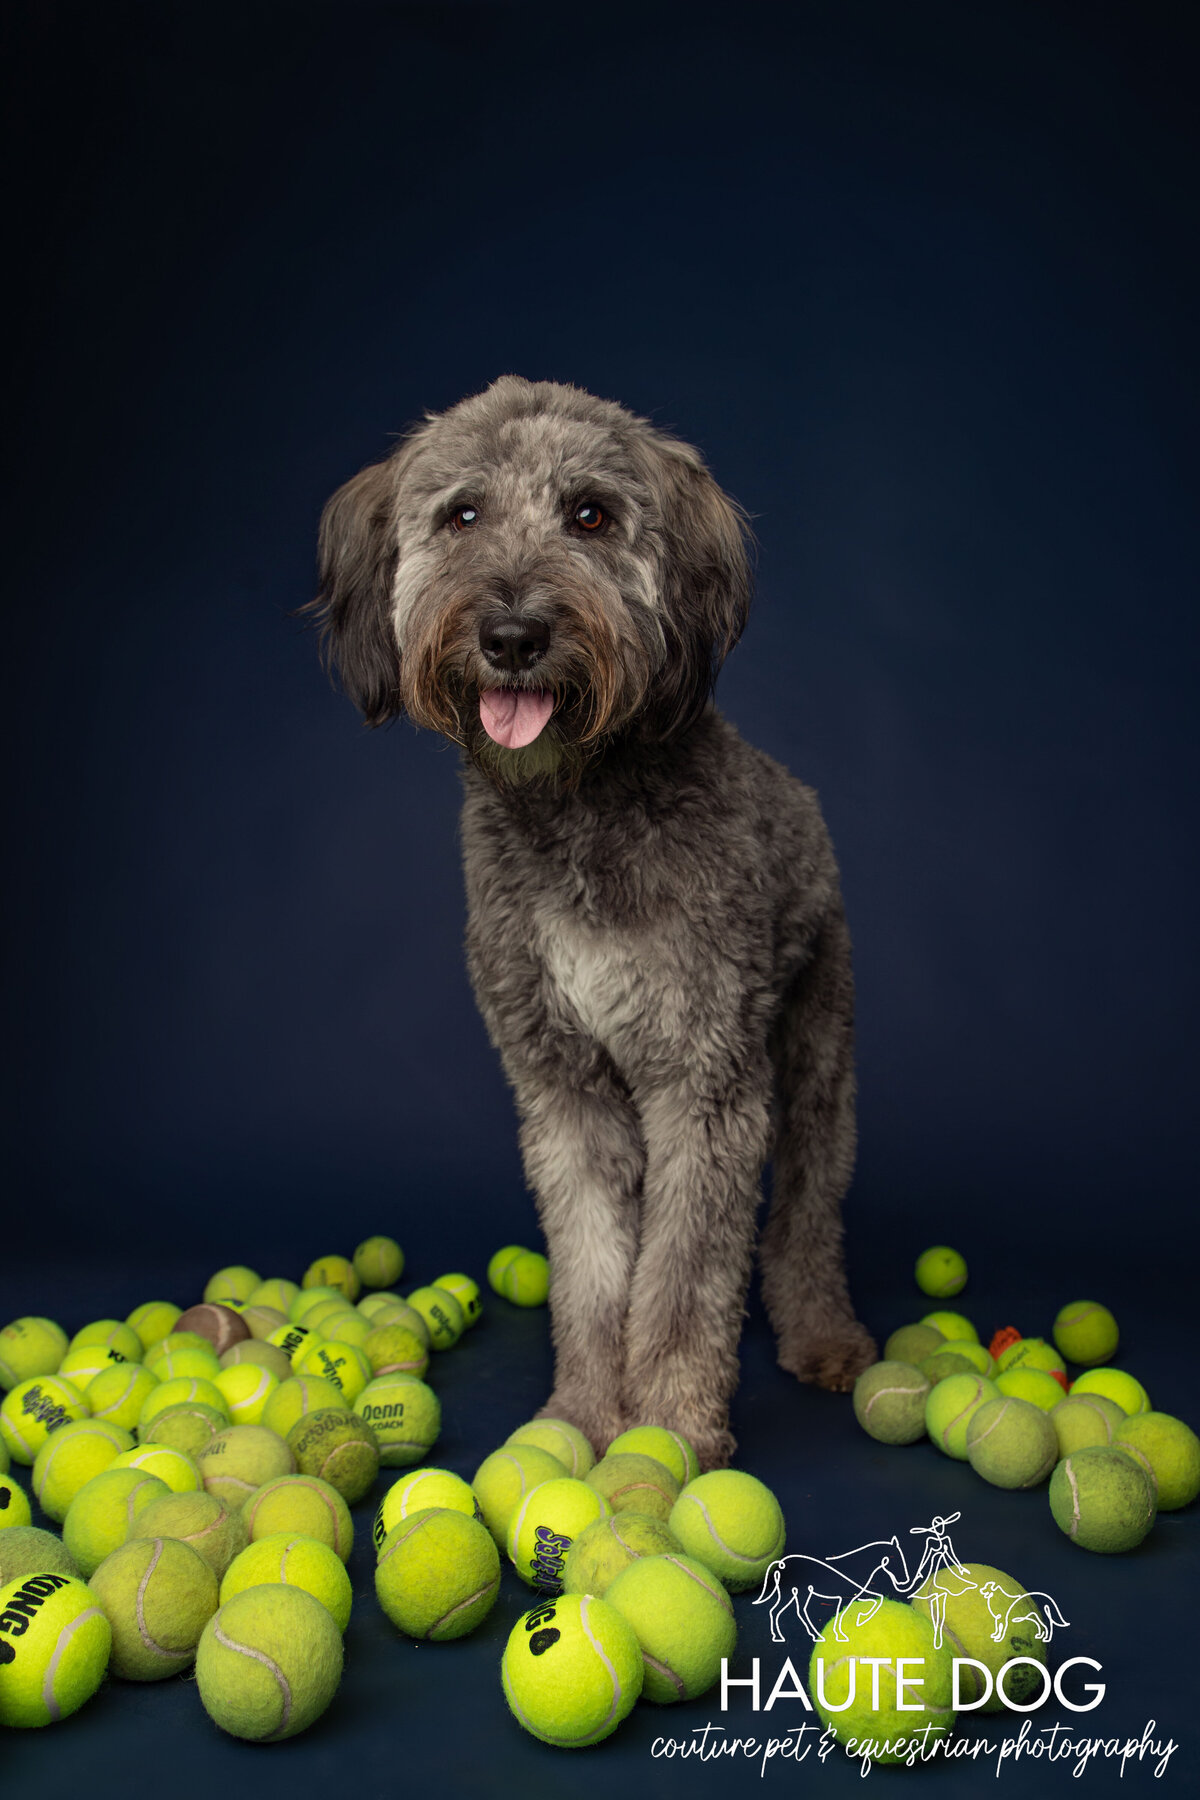 A gray Doodle dog standing amidst tennis balls on a solid blue background, with a playful and happy expression at Haute Dog studio.